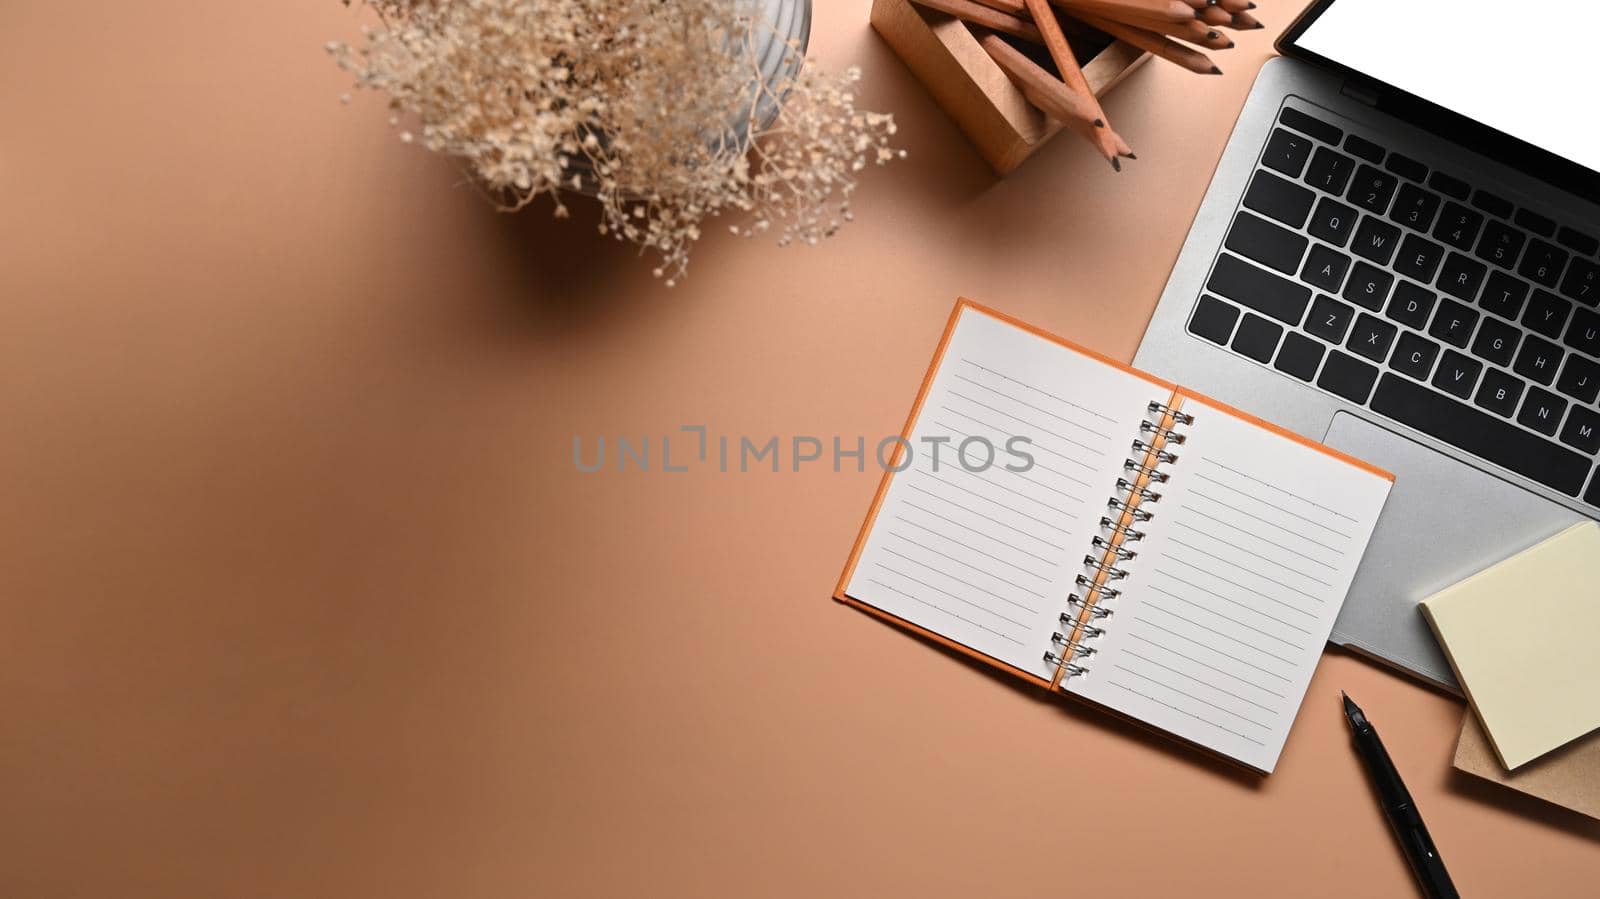 Stylish workspace with laptop, notebook, stick notes and pencil holder on beige background.